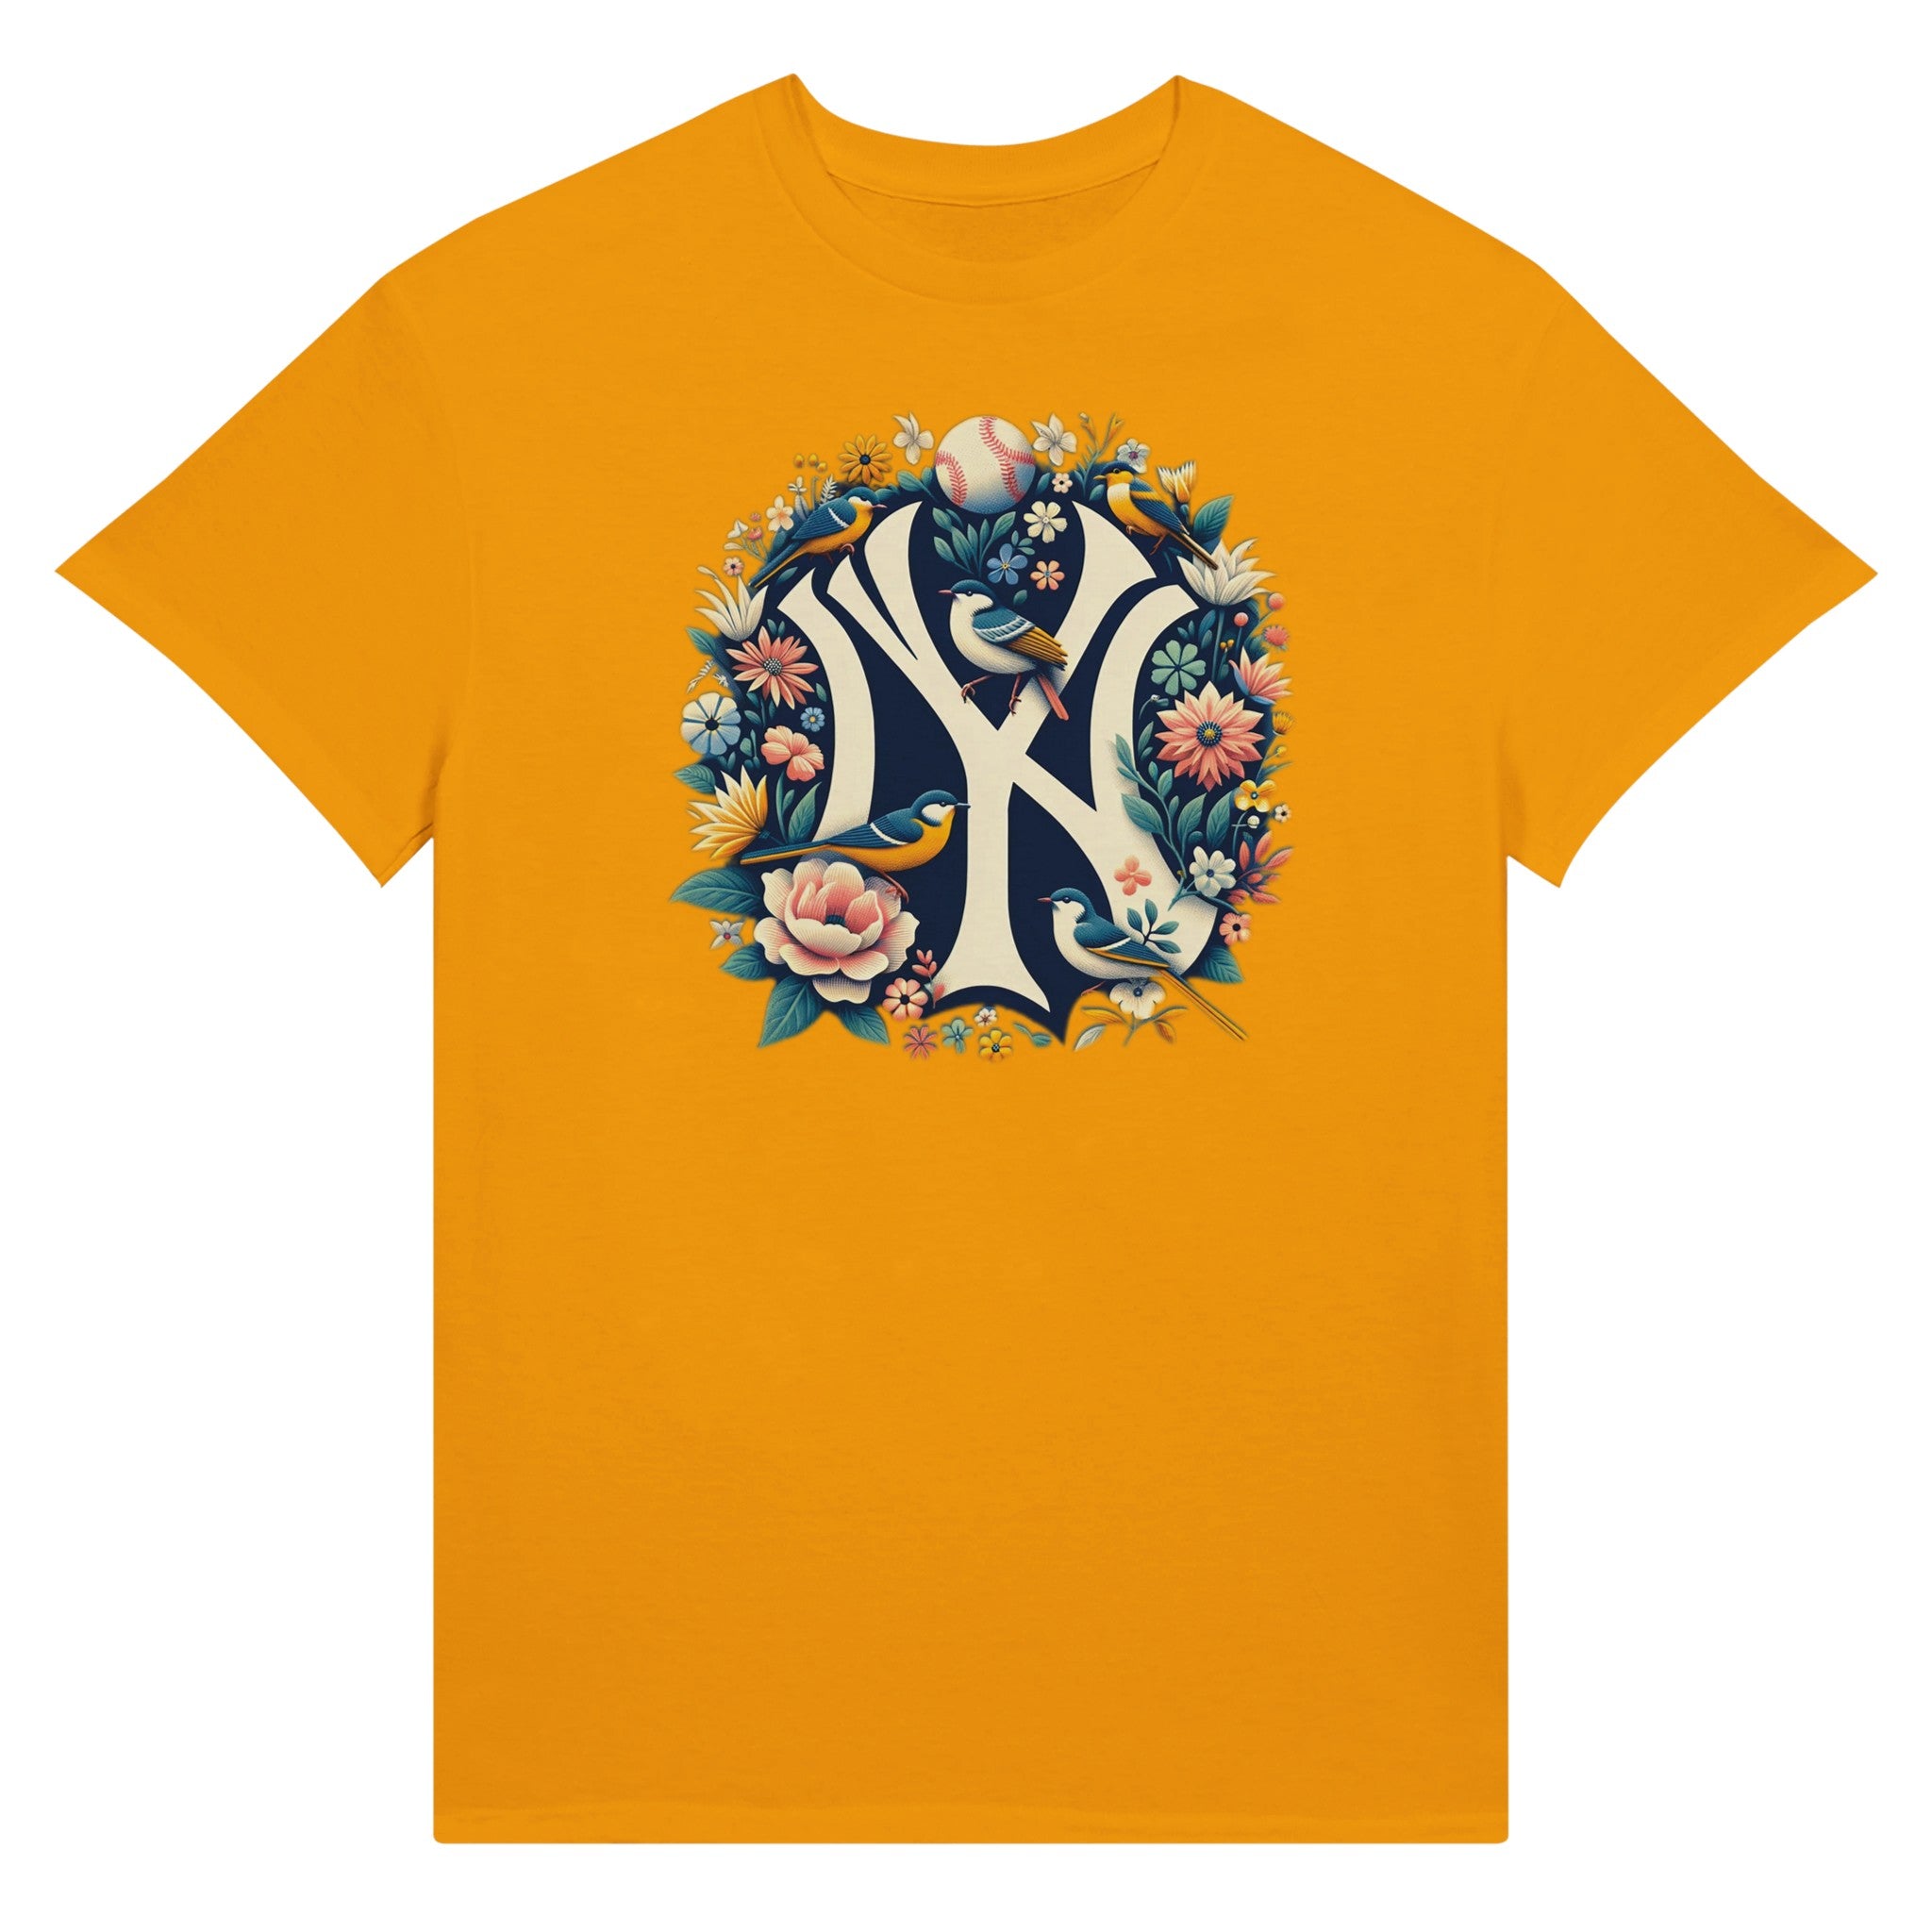 NY Floral Emblem Tee - Double R Rags